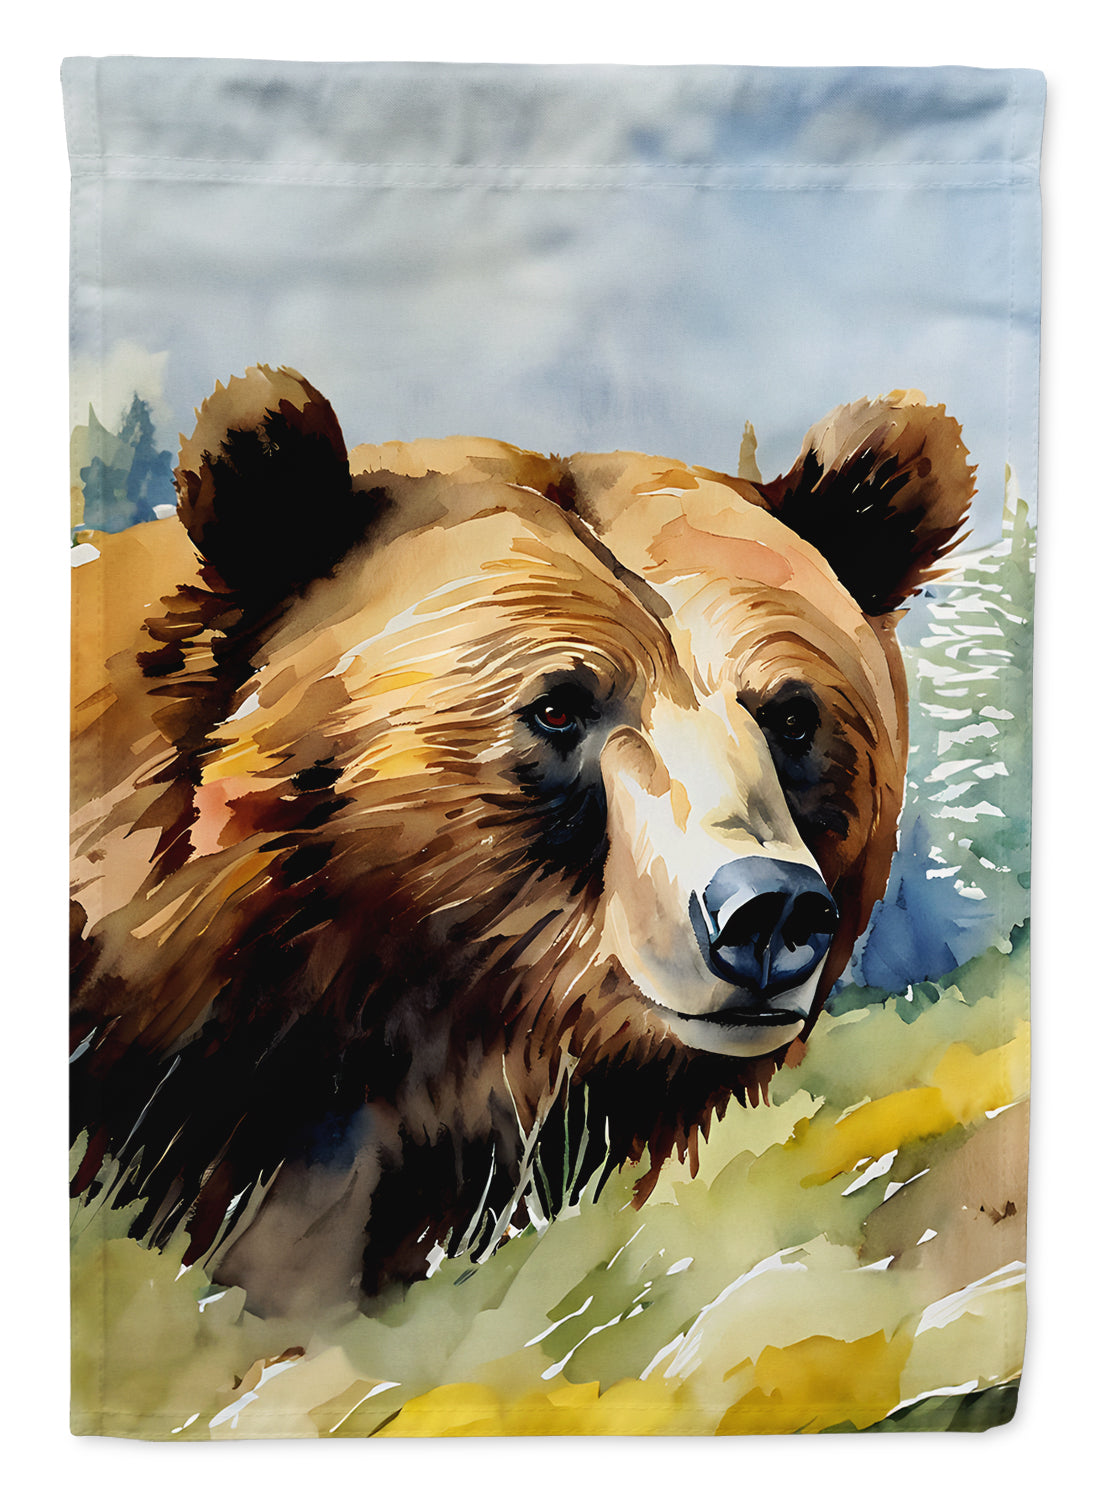 Buy this Grizzly Bear Garden Flag